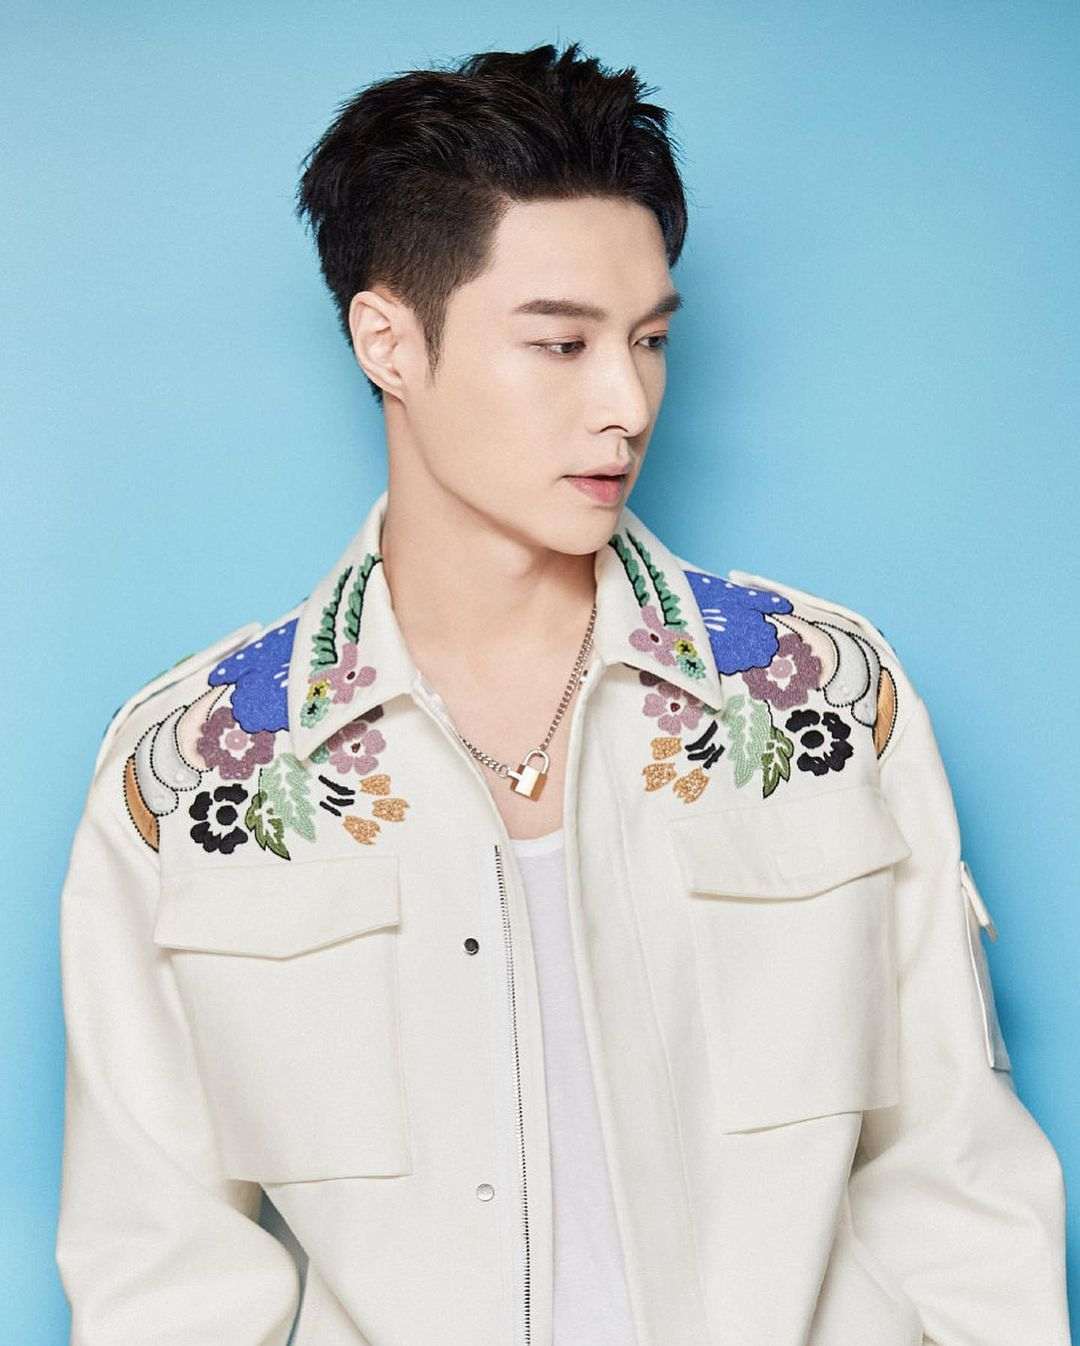 Lay EXO - Biography, Profile, Facts, and Career